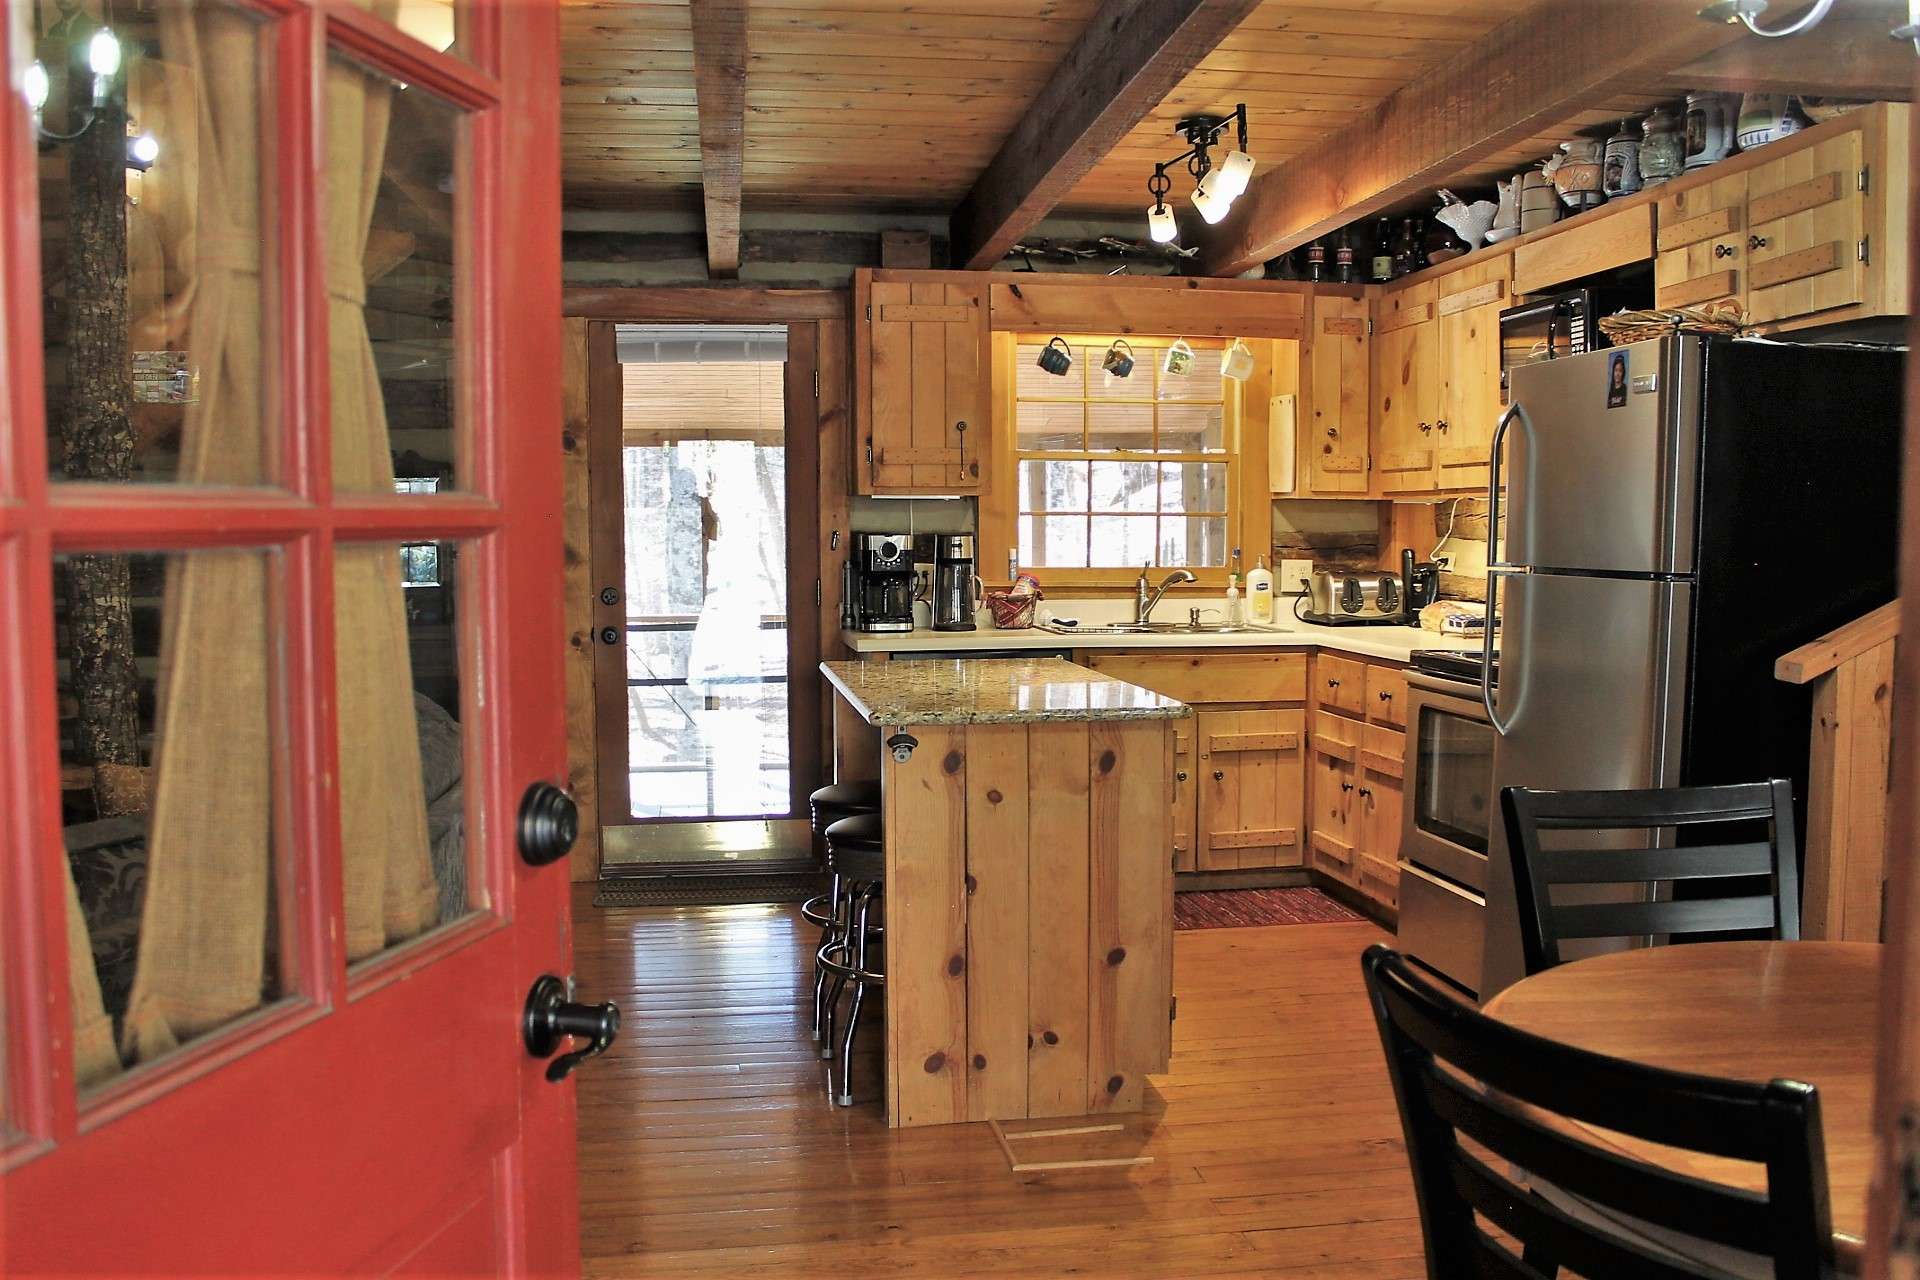 Step inside and appreciate the rustic details mixed with modern conveniences.